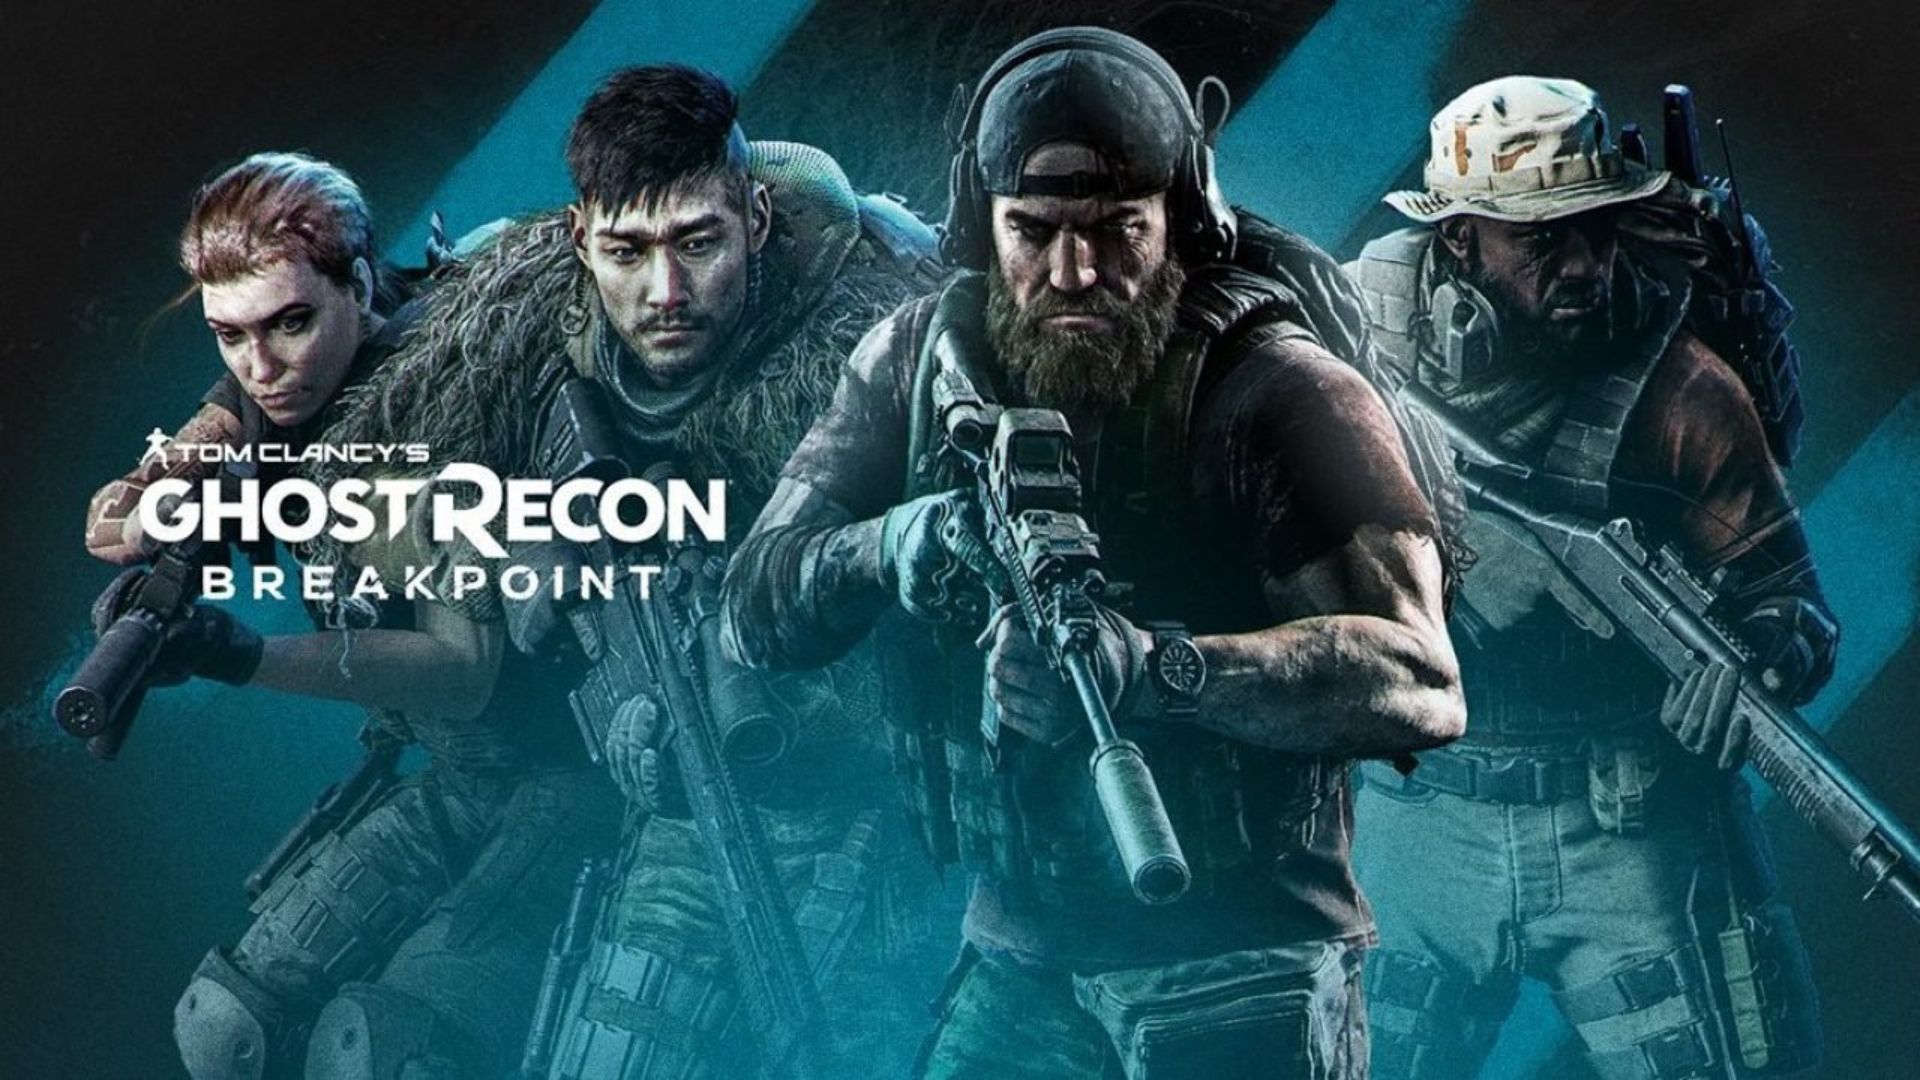 New Tom Clancys Ghost Recon Breakpoint 2020 Wallpapers